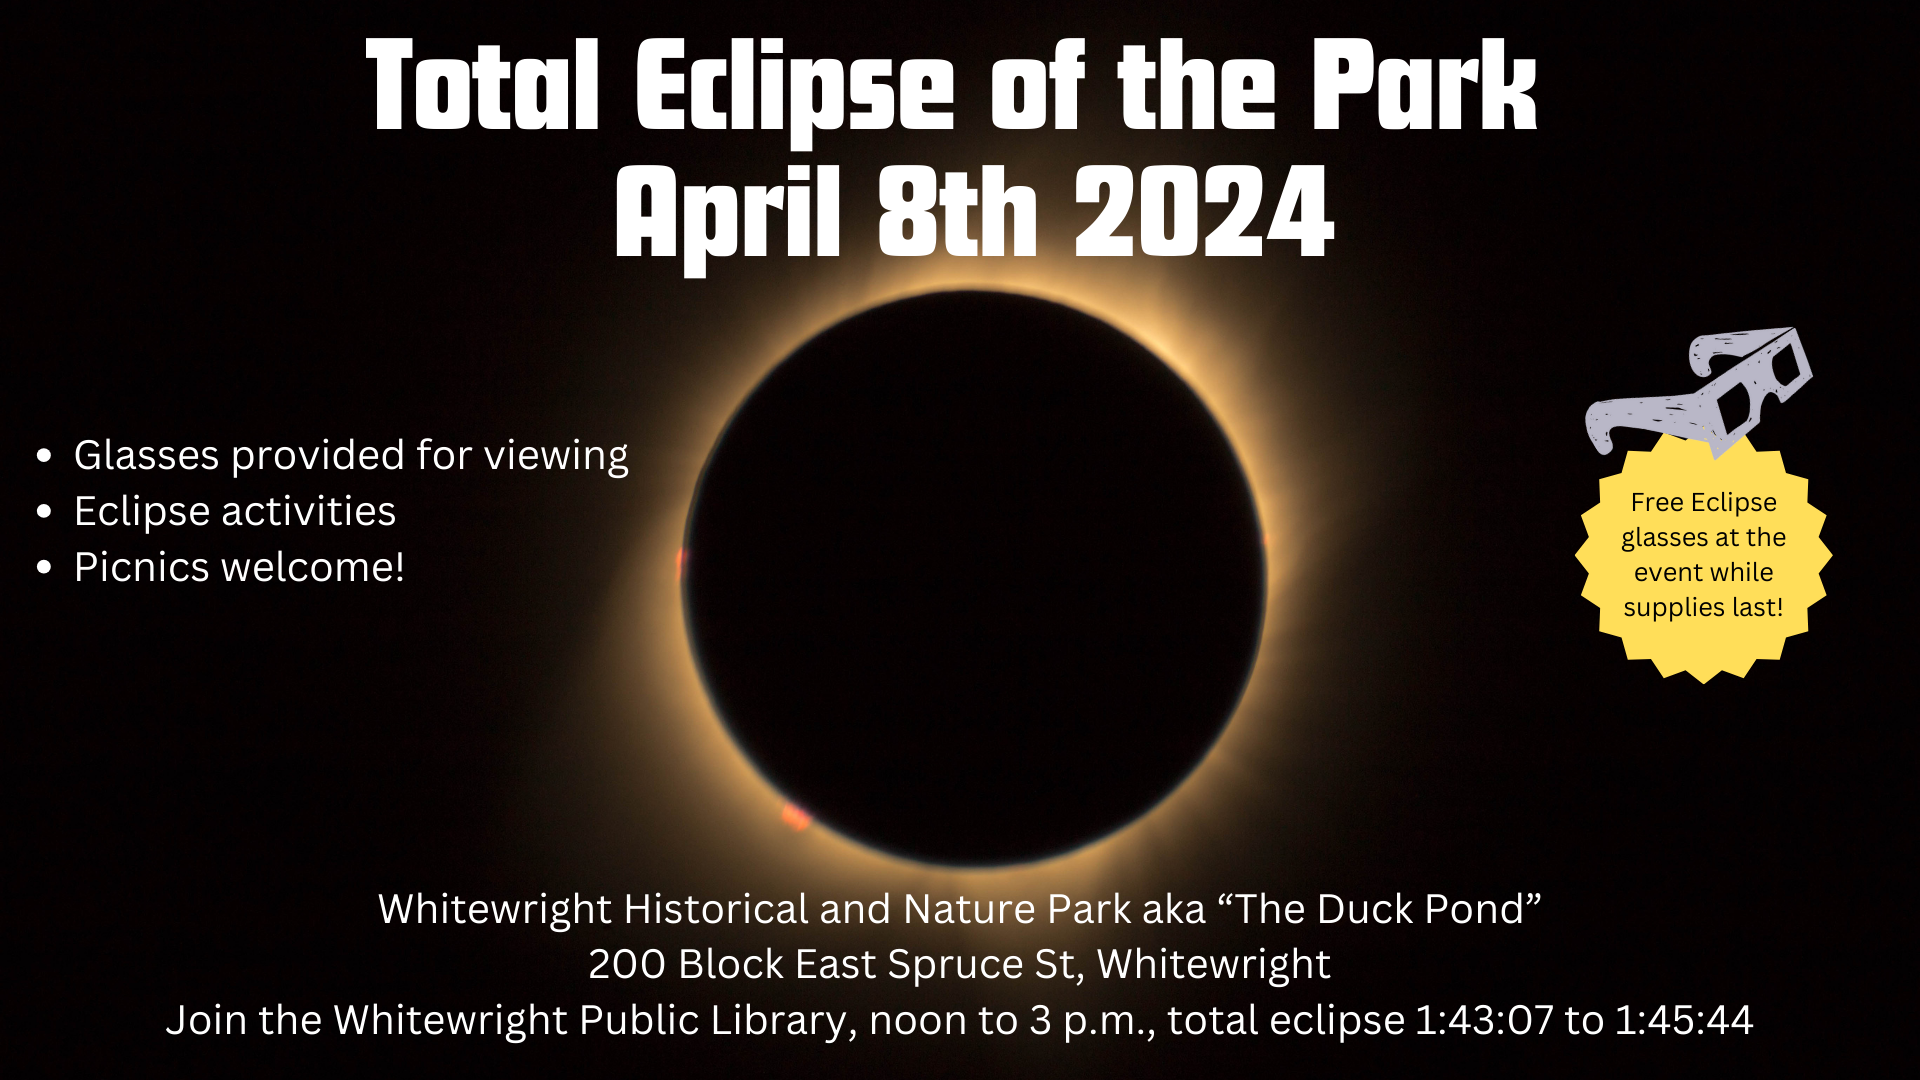 Total Eclipse of the Park, April 8th, 2024